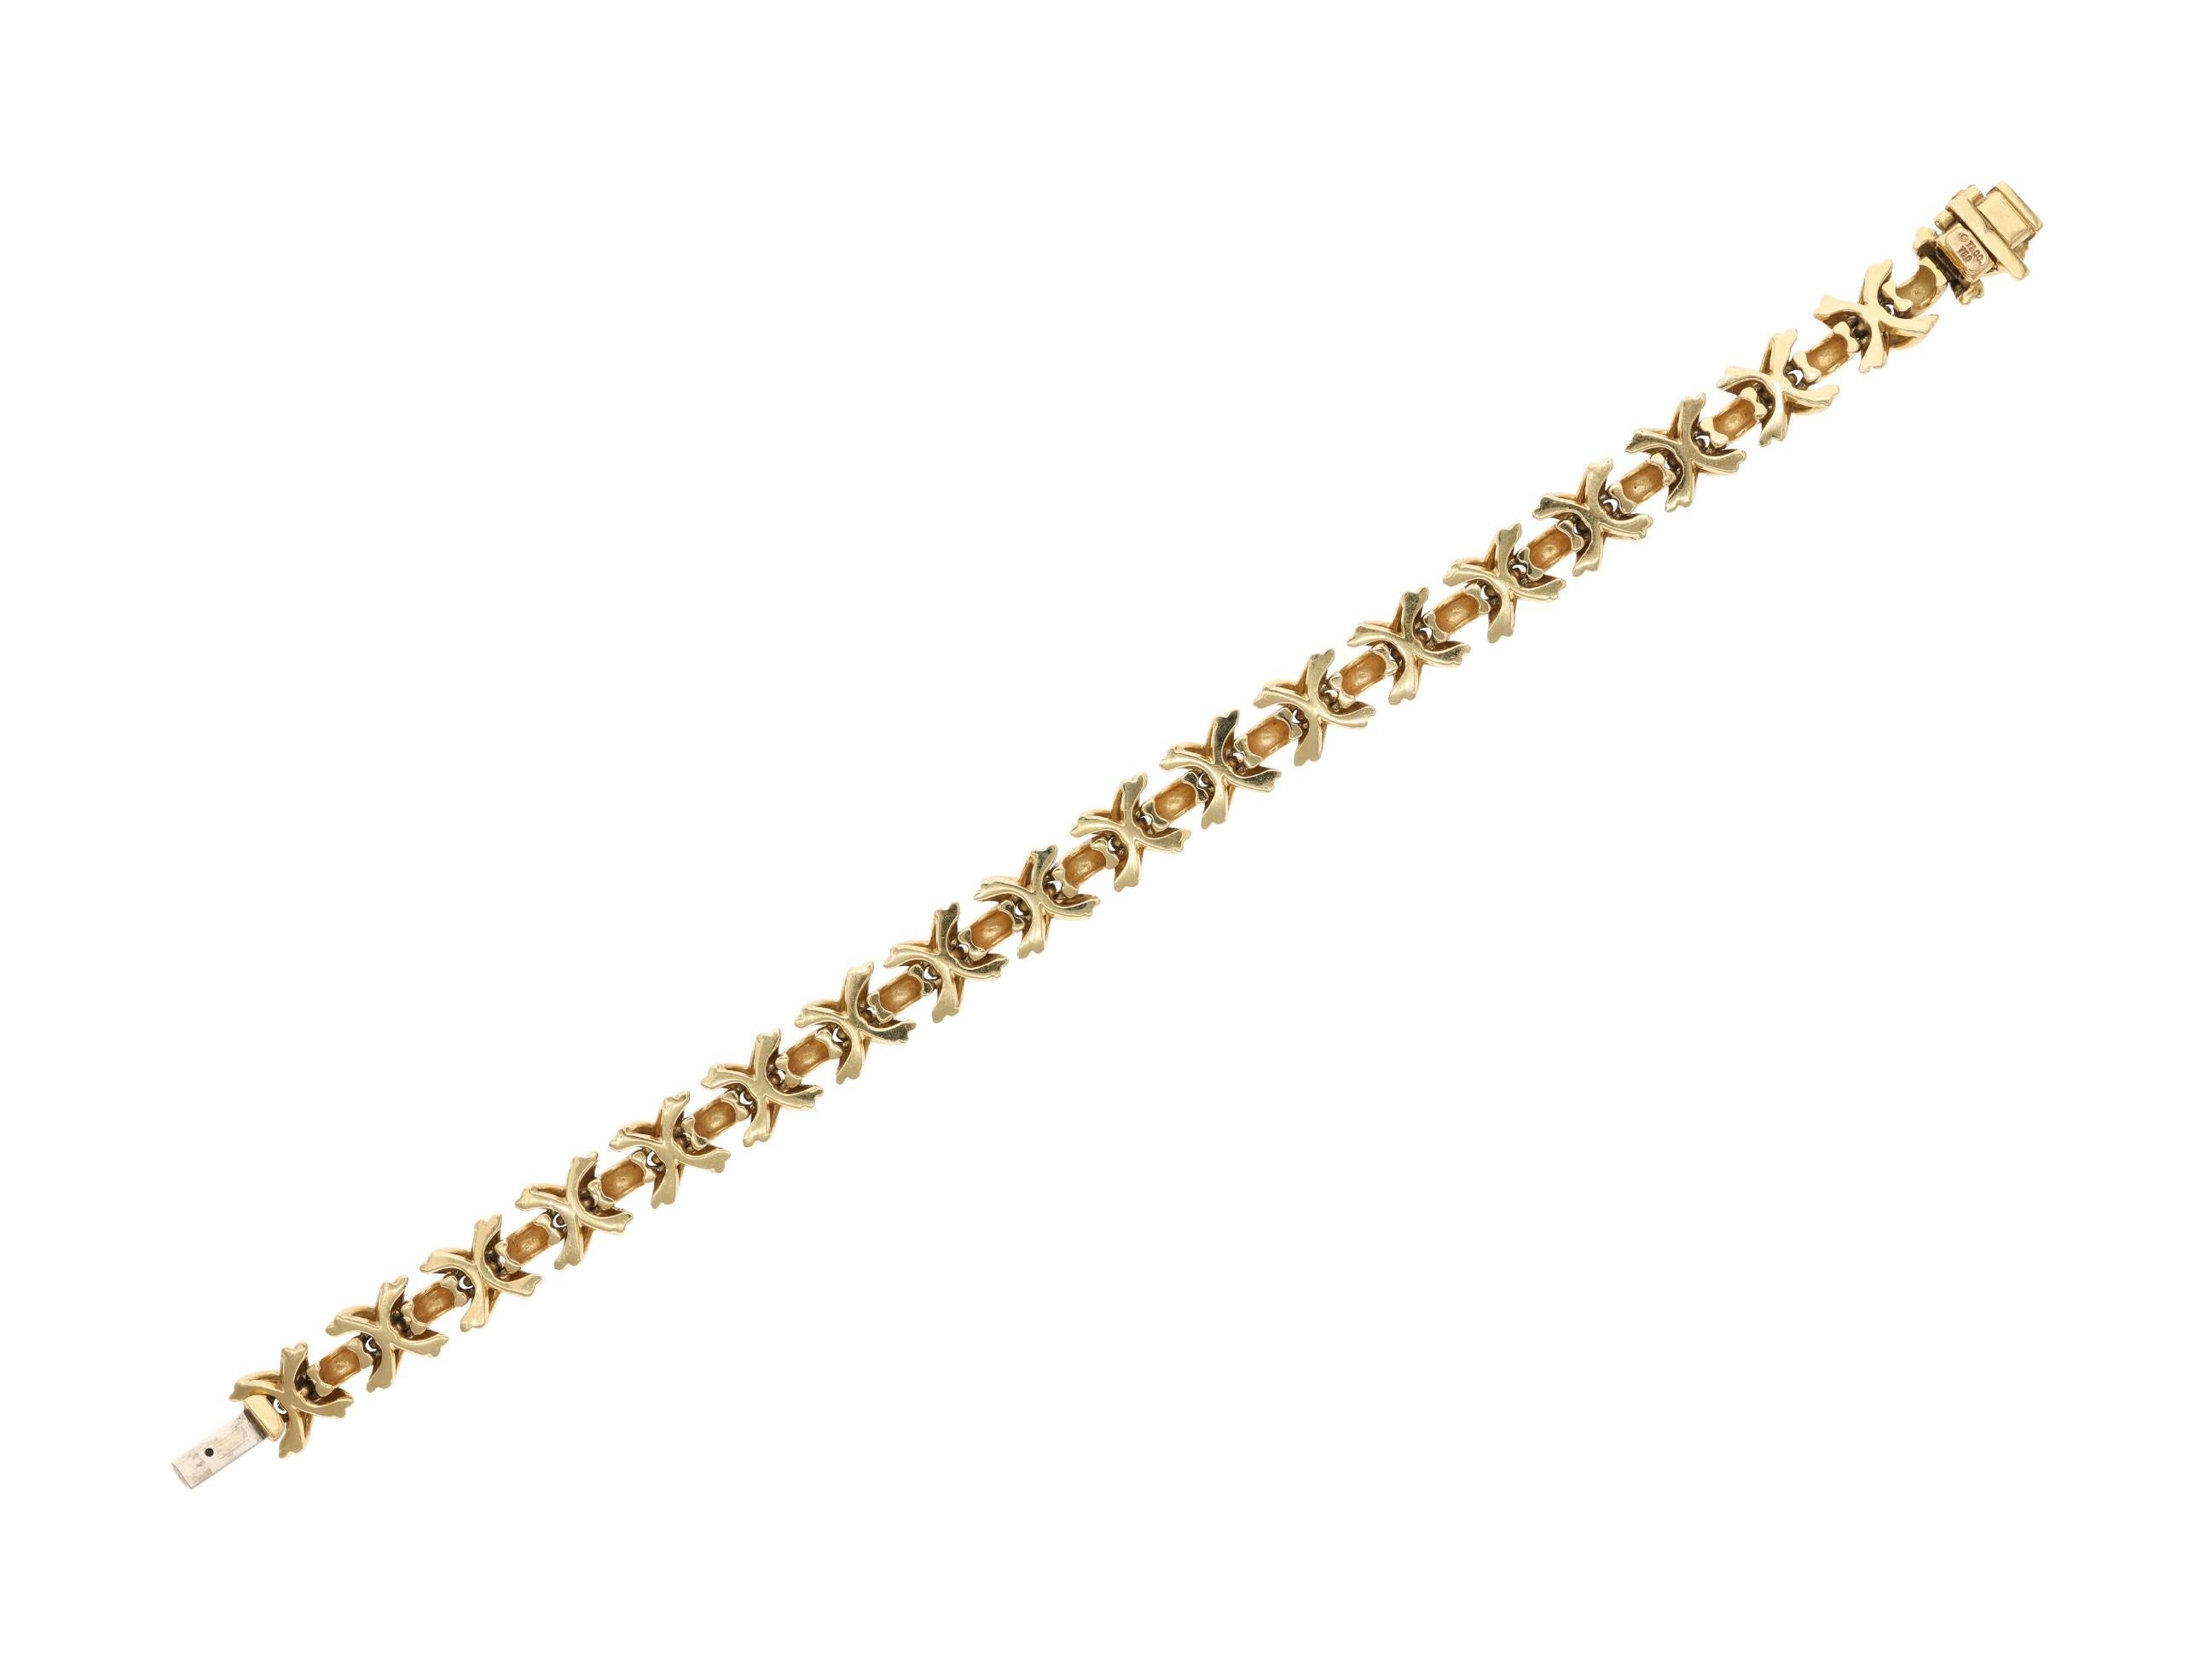 A Tiffany & Co. creation, featuring x motifs.

- Signed T&Co.
- 18 karat yellow gold
- Total weight 31.80 grams
- Length 7.25 inches

The condition report is Very Good. 

Perfect for weekend getaways, casual settings. 